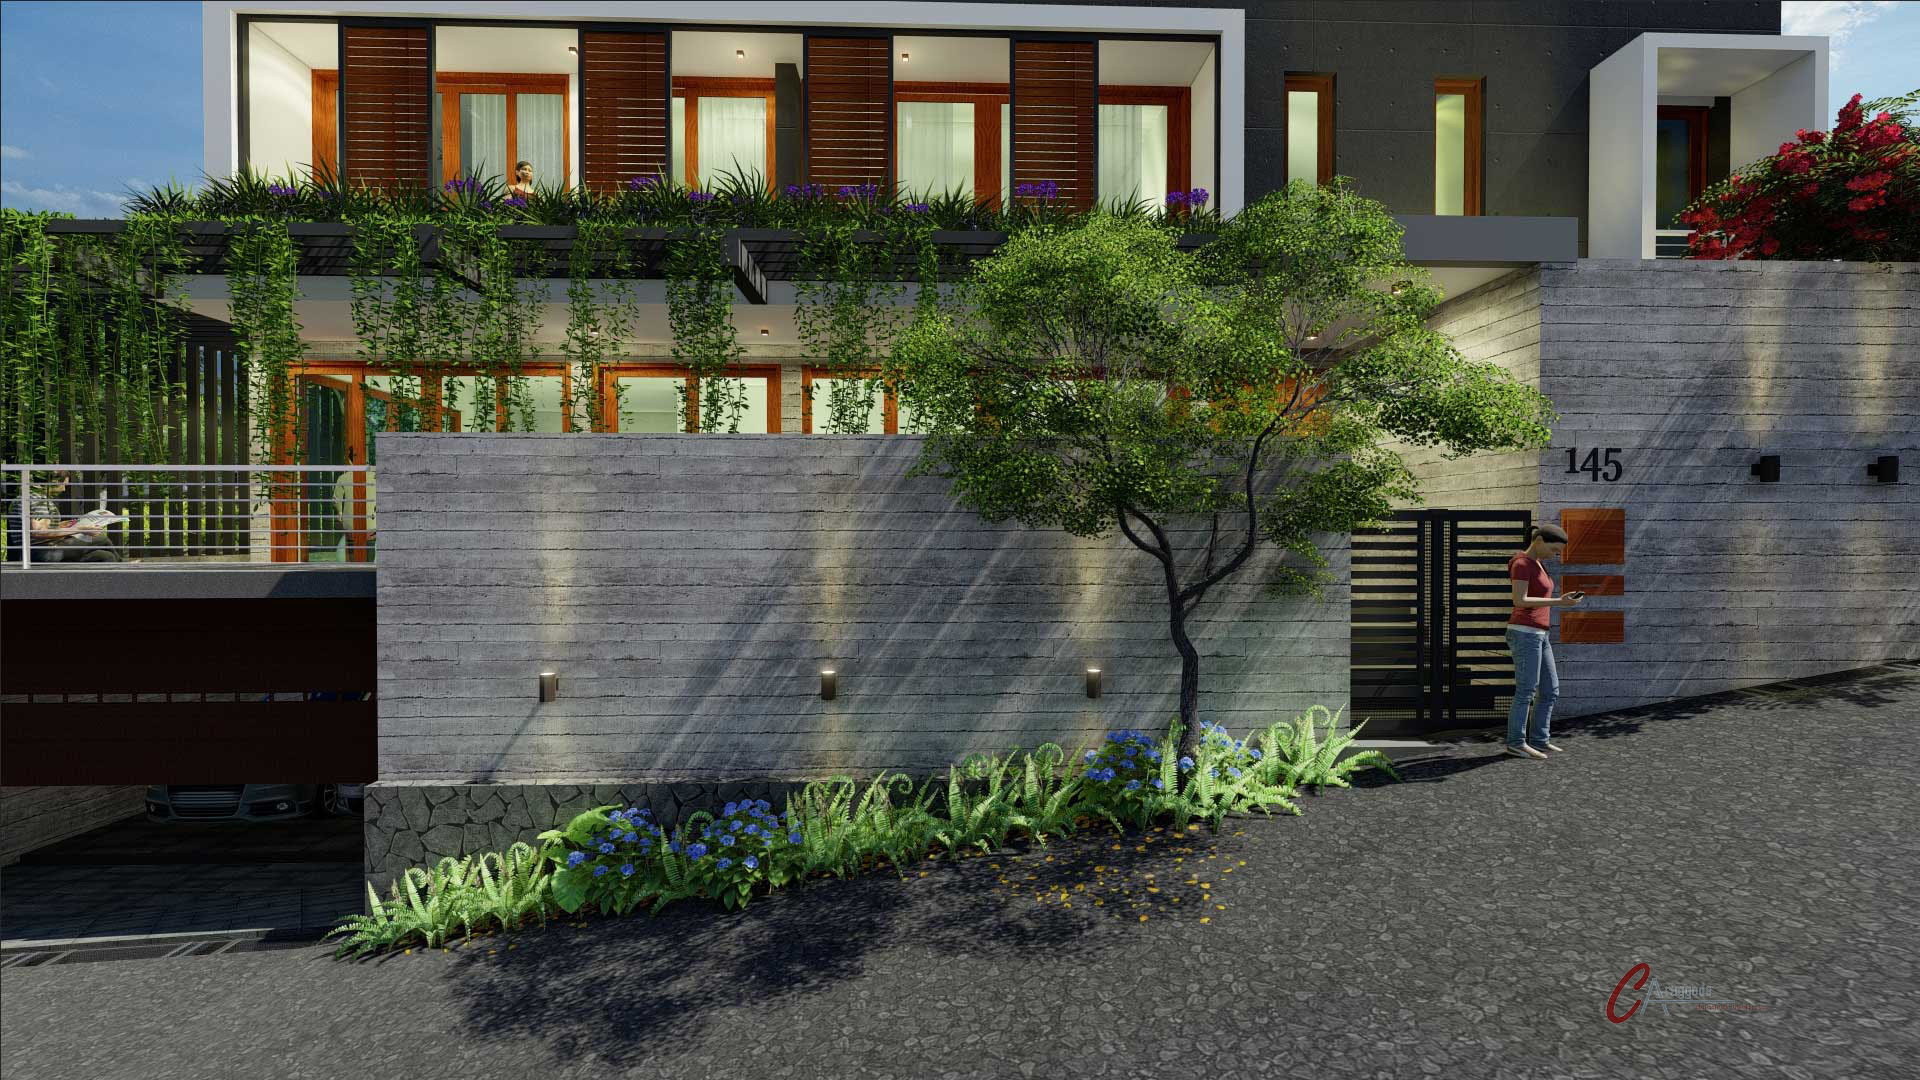 RESIDENTIAL PROJECT